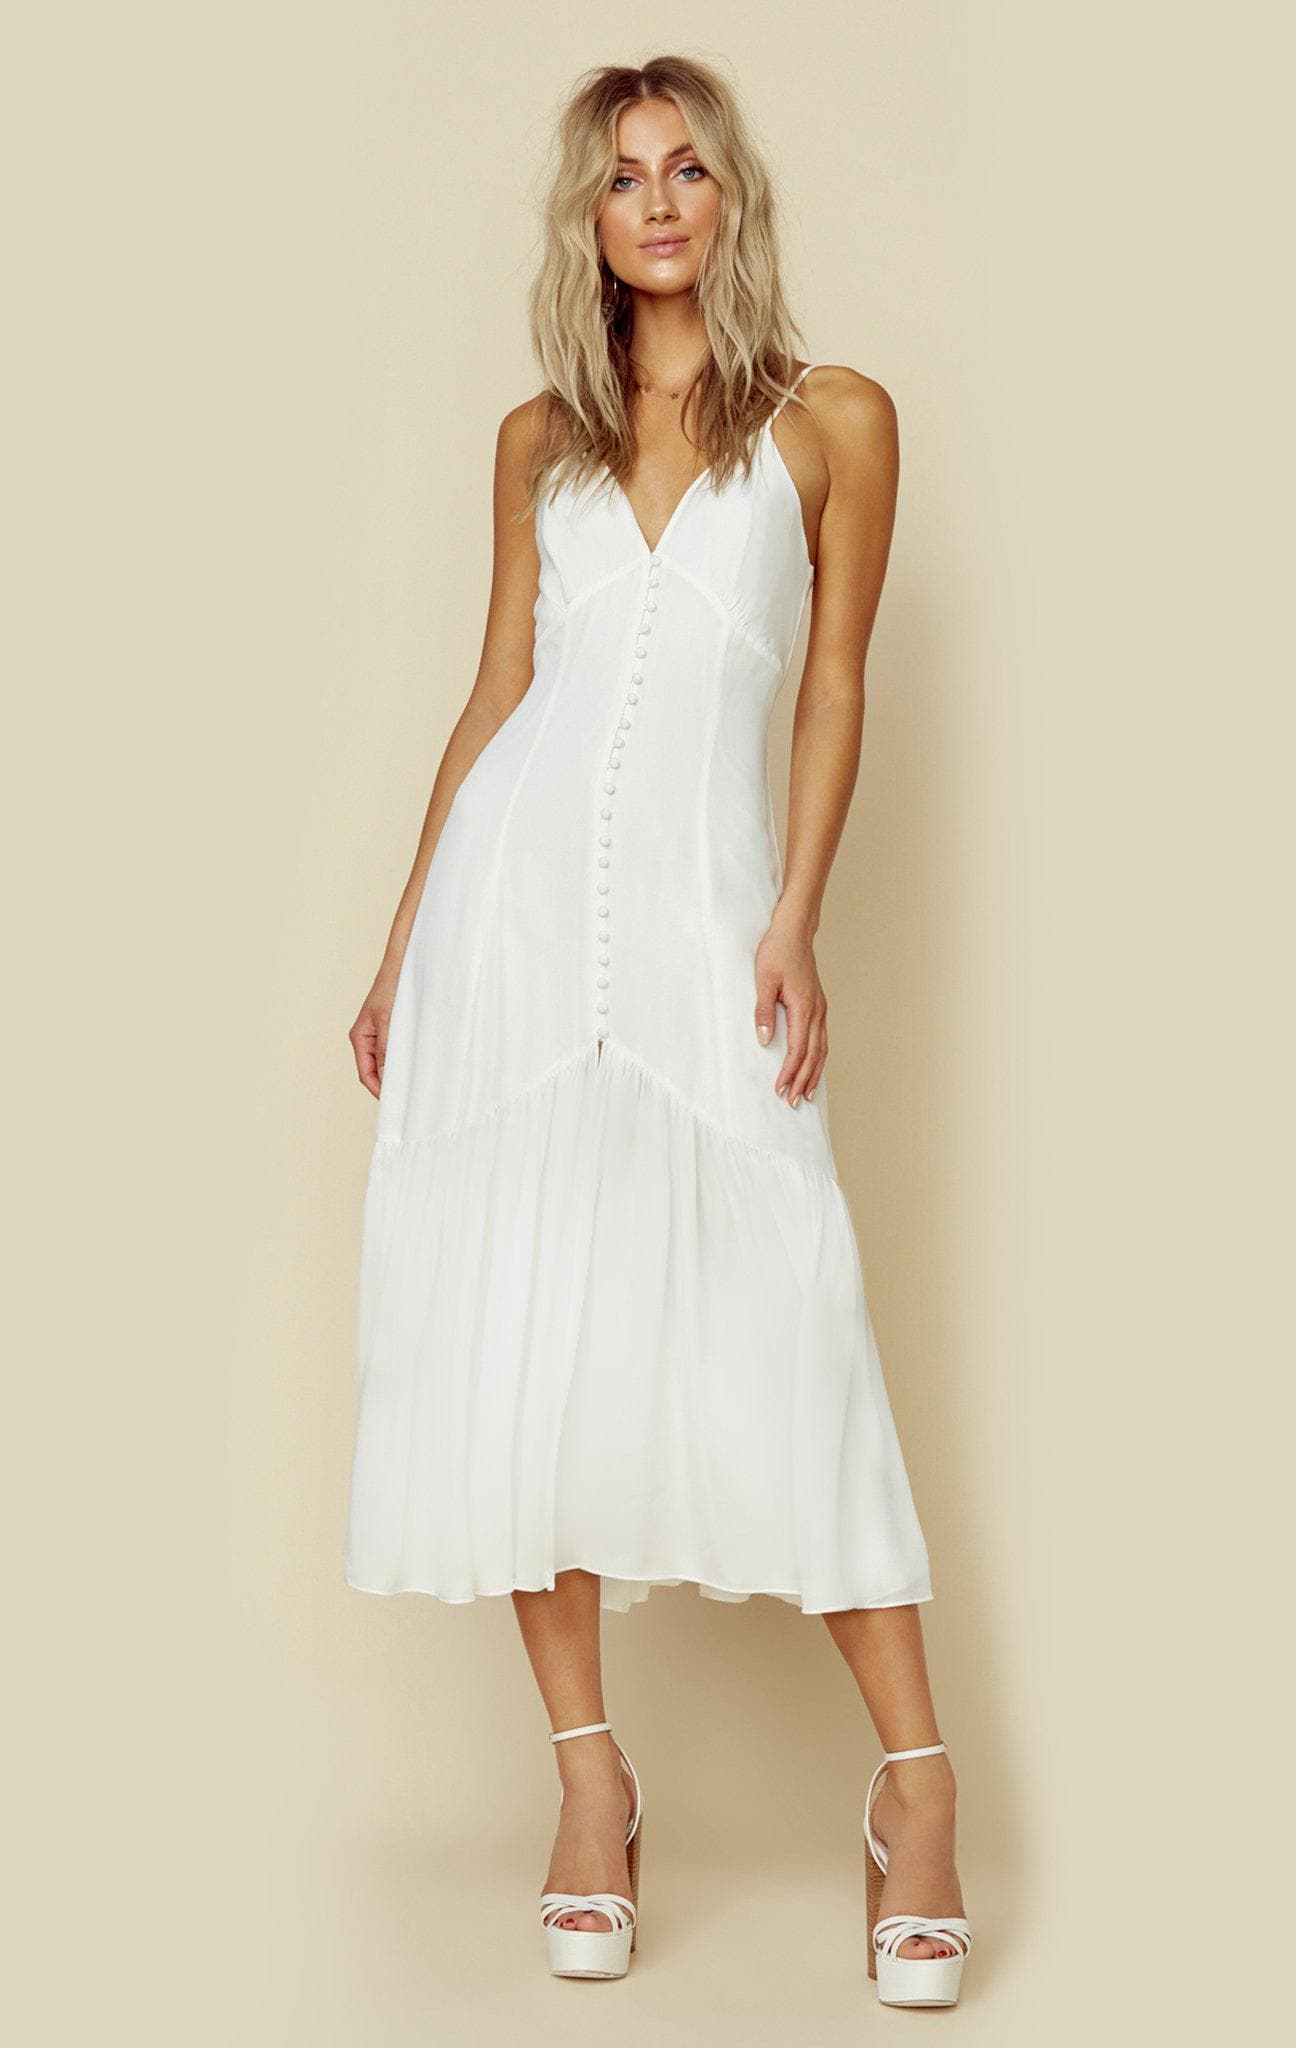 CAMI NYC THE LAUREL DRESS - WHITE